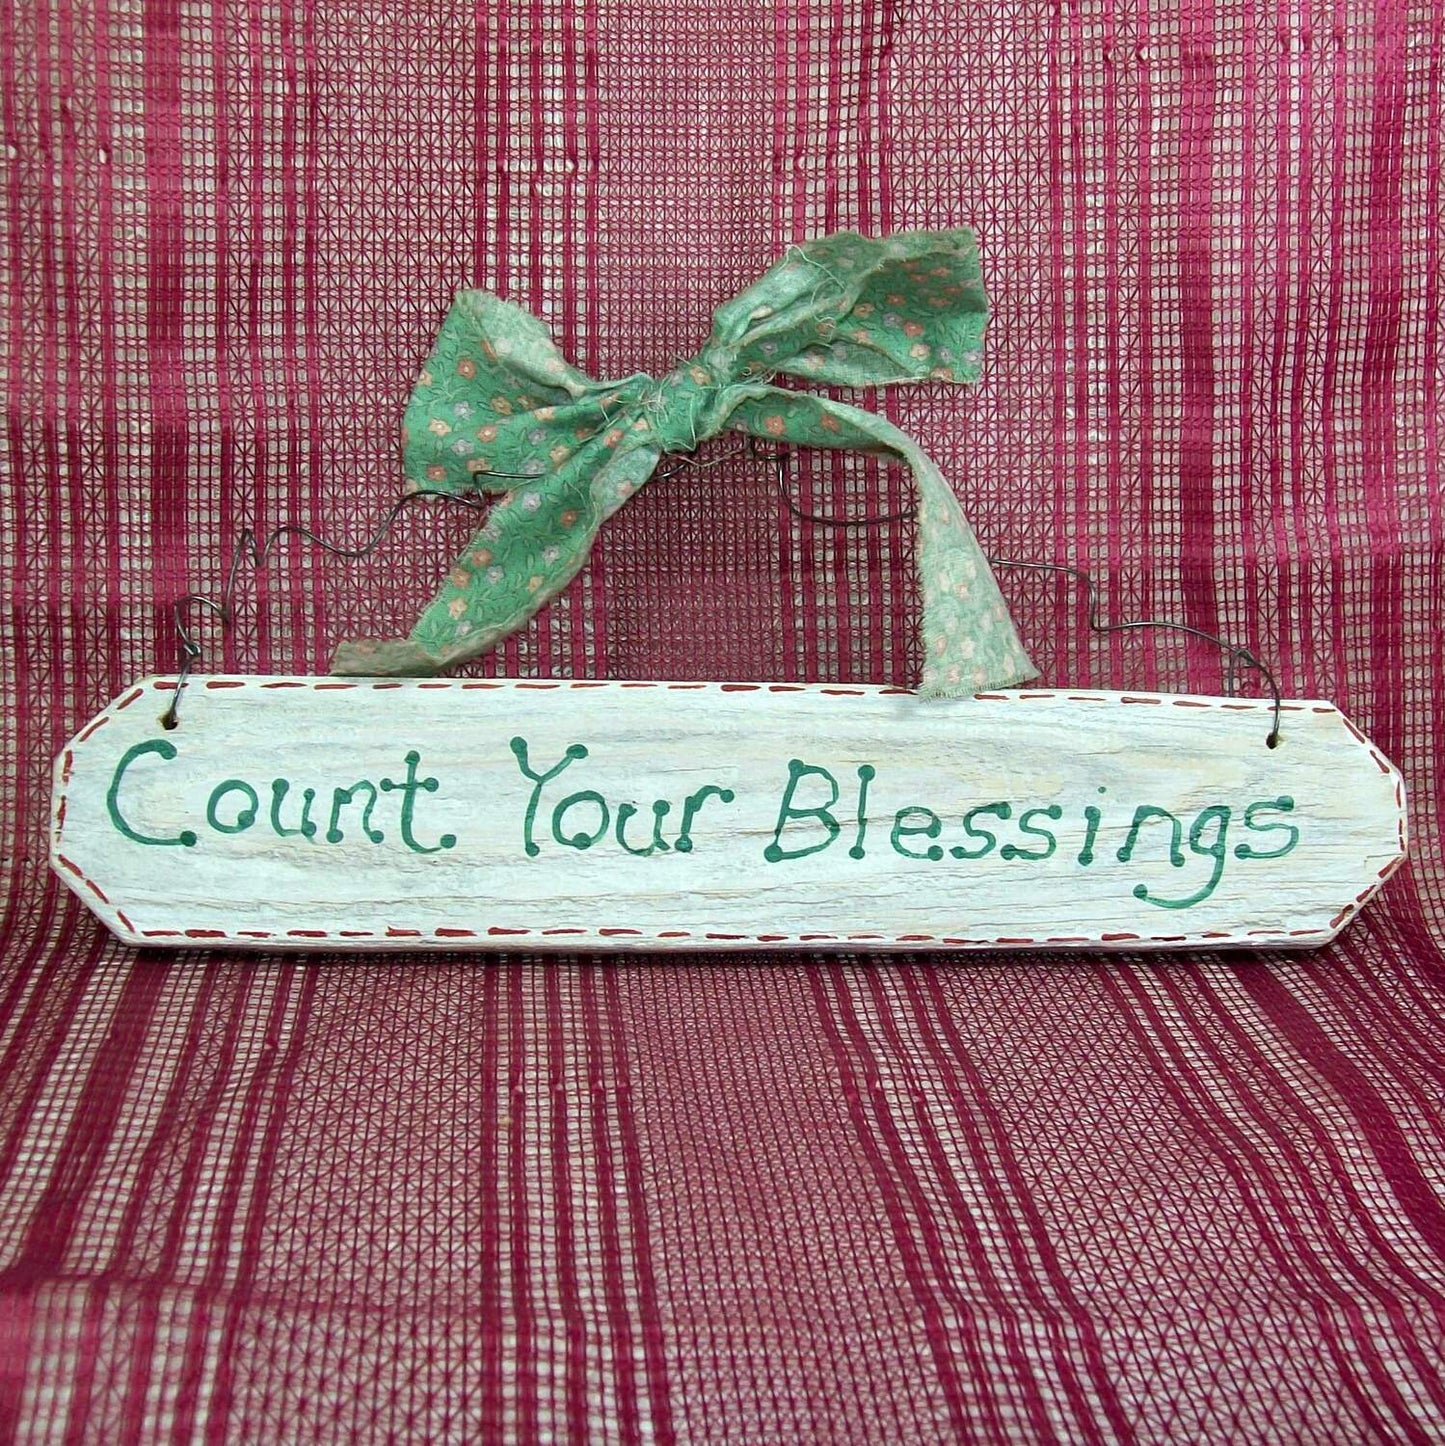 Rustic Wood Sign / Country Wall Decor / Wooden Sign with Saying / Rustic Wood Wall Decor / Rustic Wall Art / Count Your Blessings